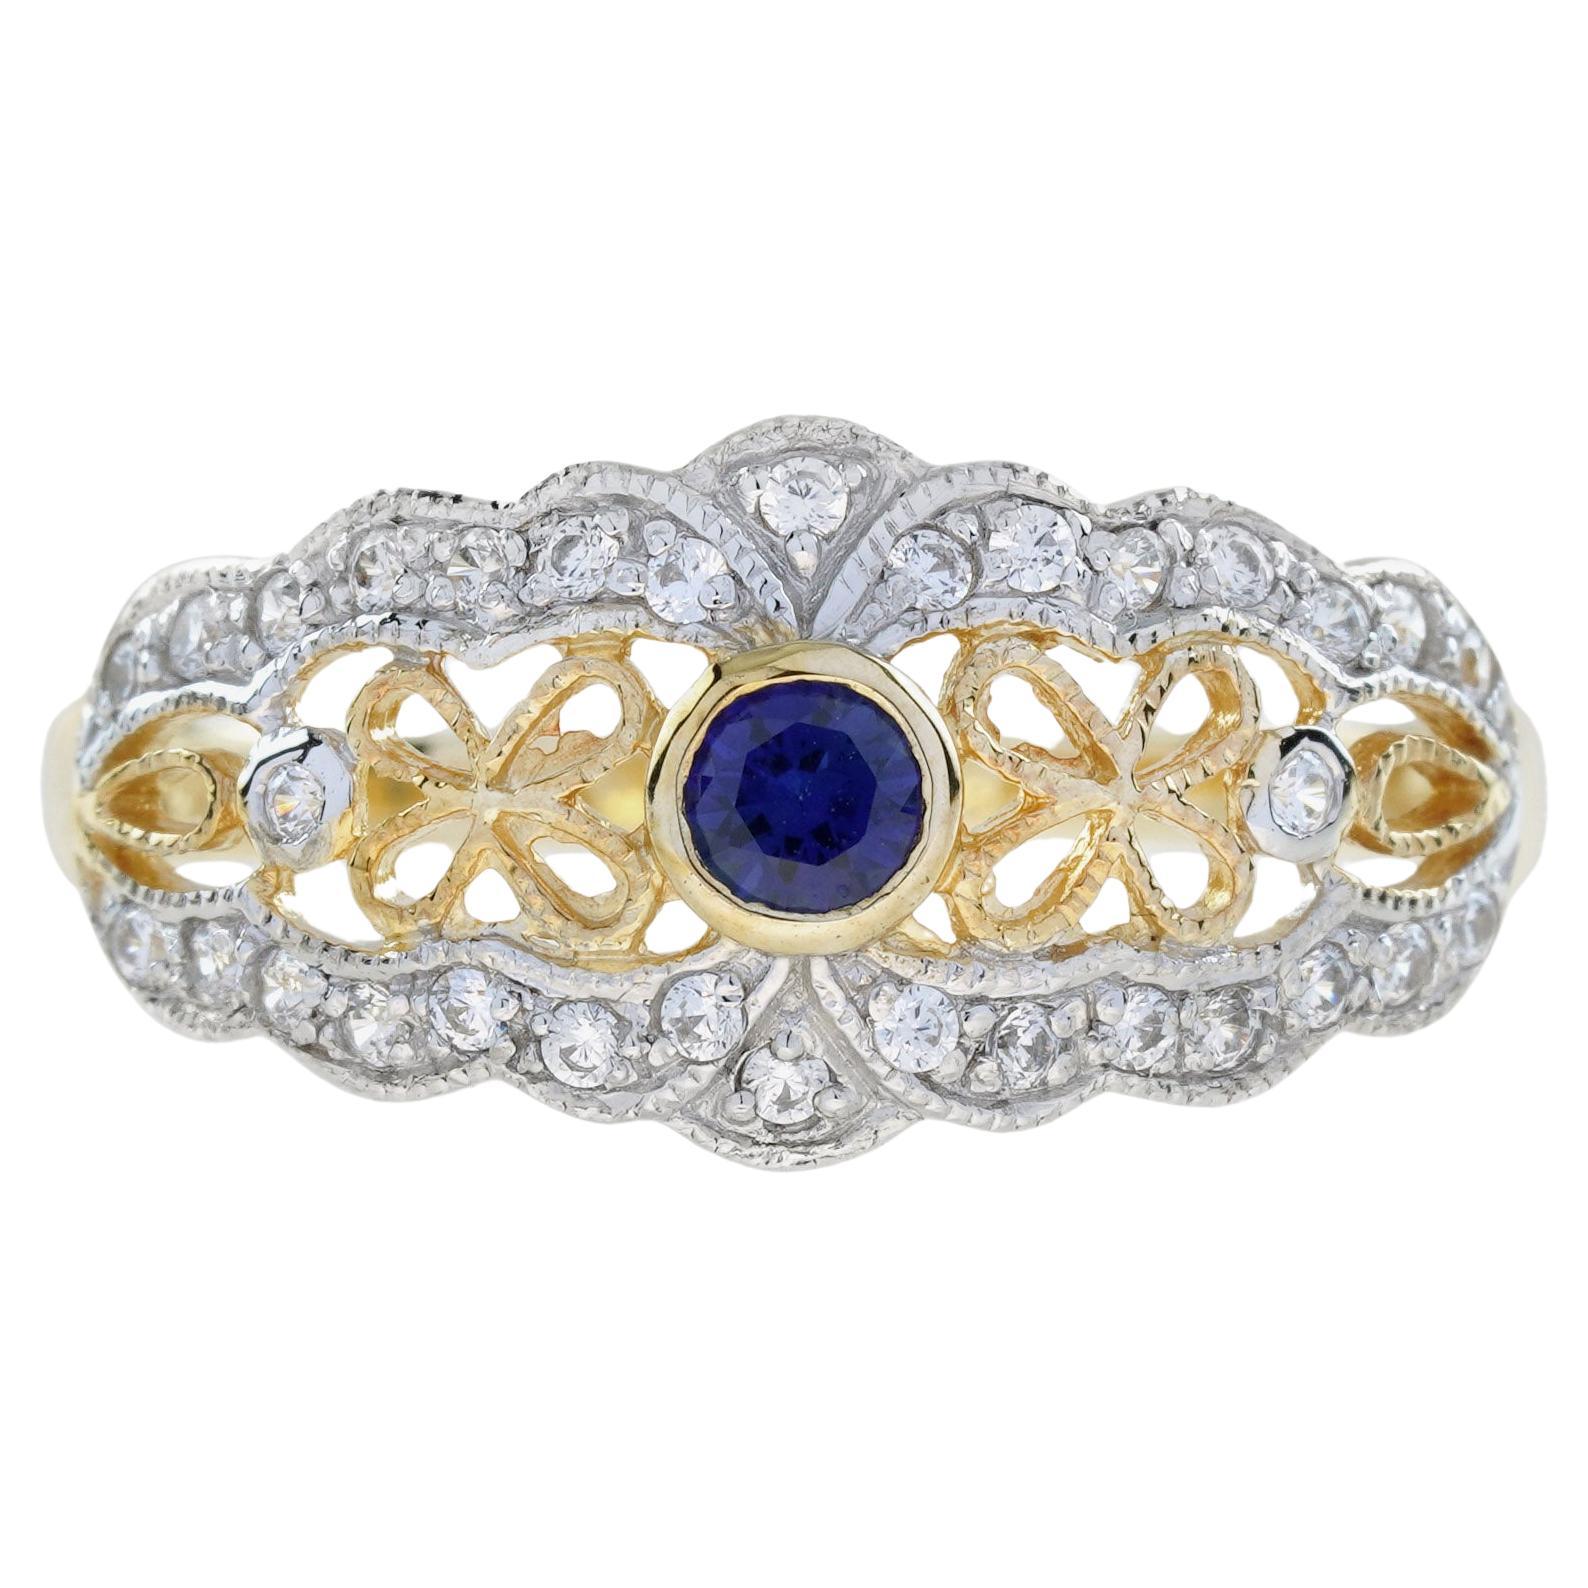 For Sale:  Blue Sapphire and Diamond Vintage Style Filigree Ring in 14K Two Tone Gold